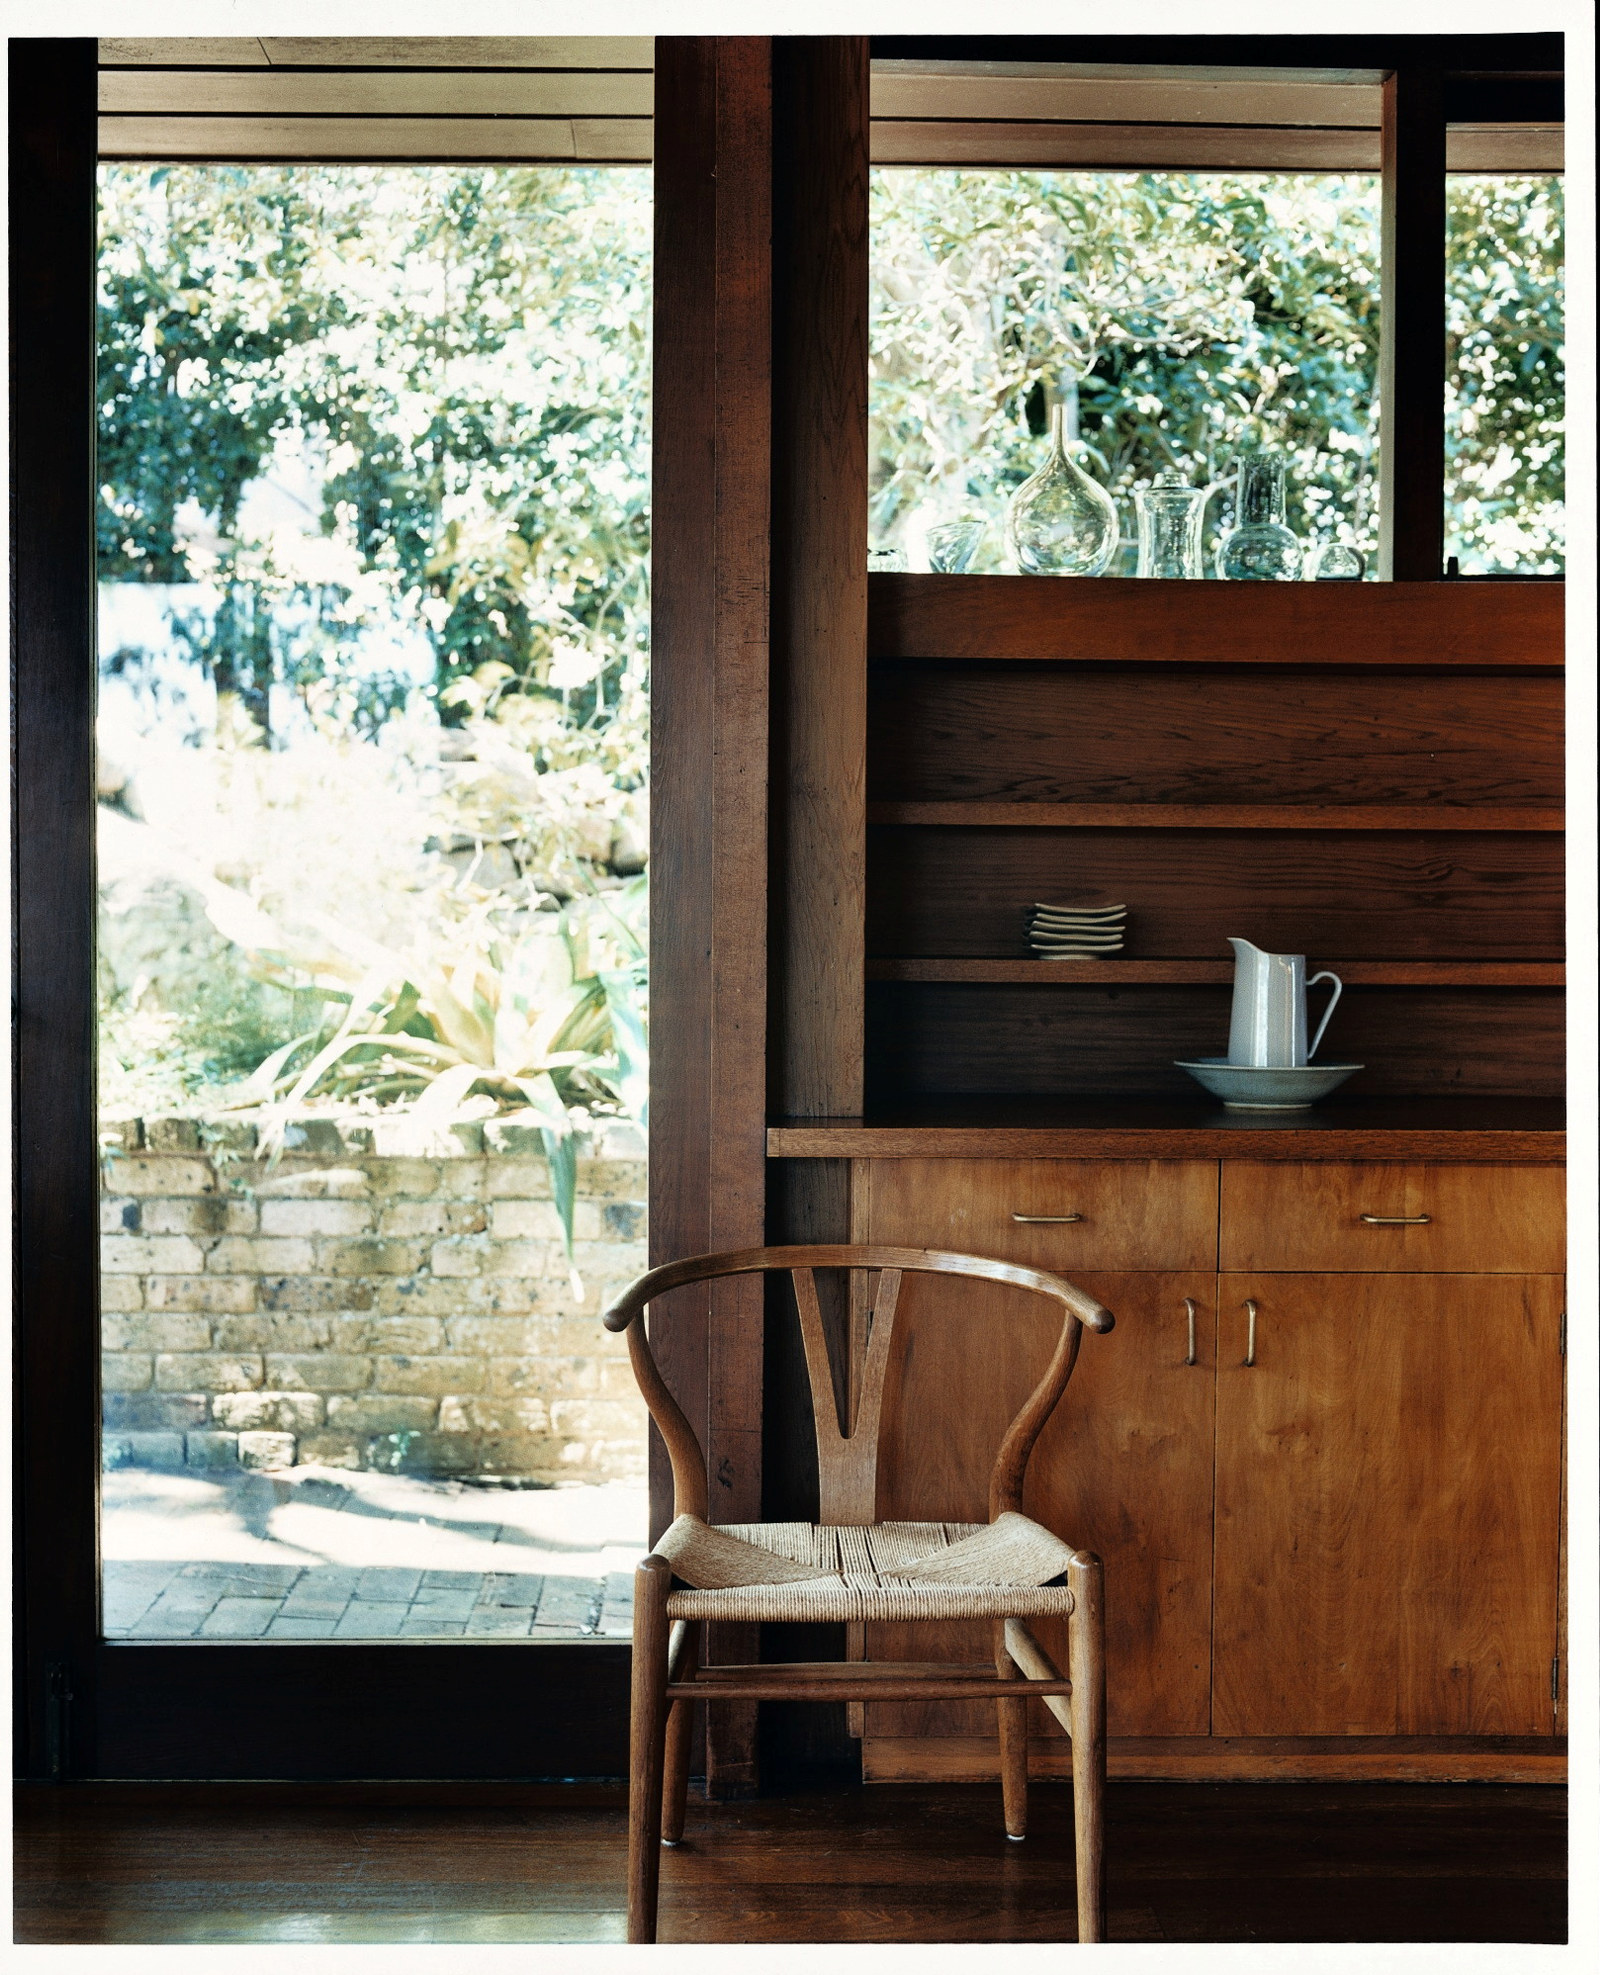 This is a photograph of a specially designed timber chair sitting in front of a timber cupboard and glass door